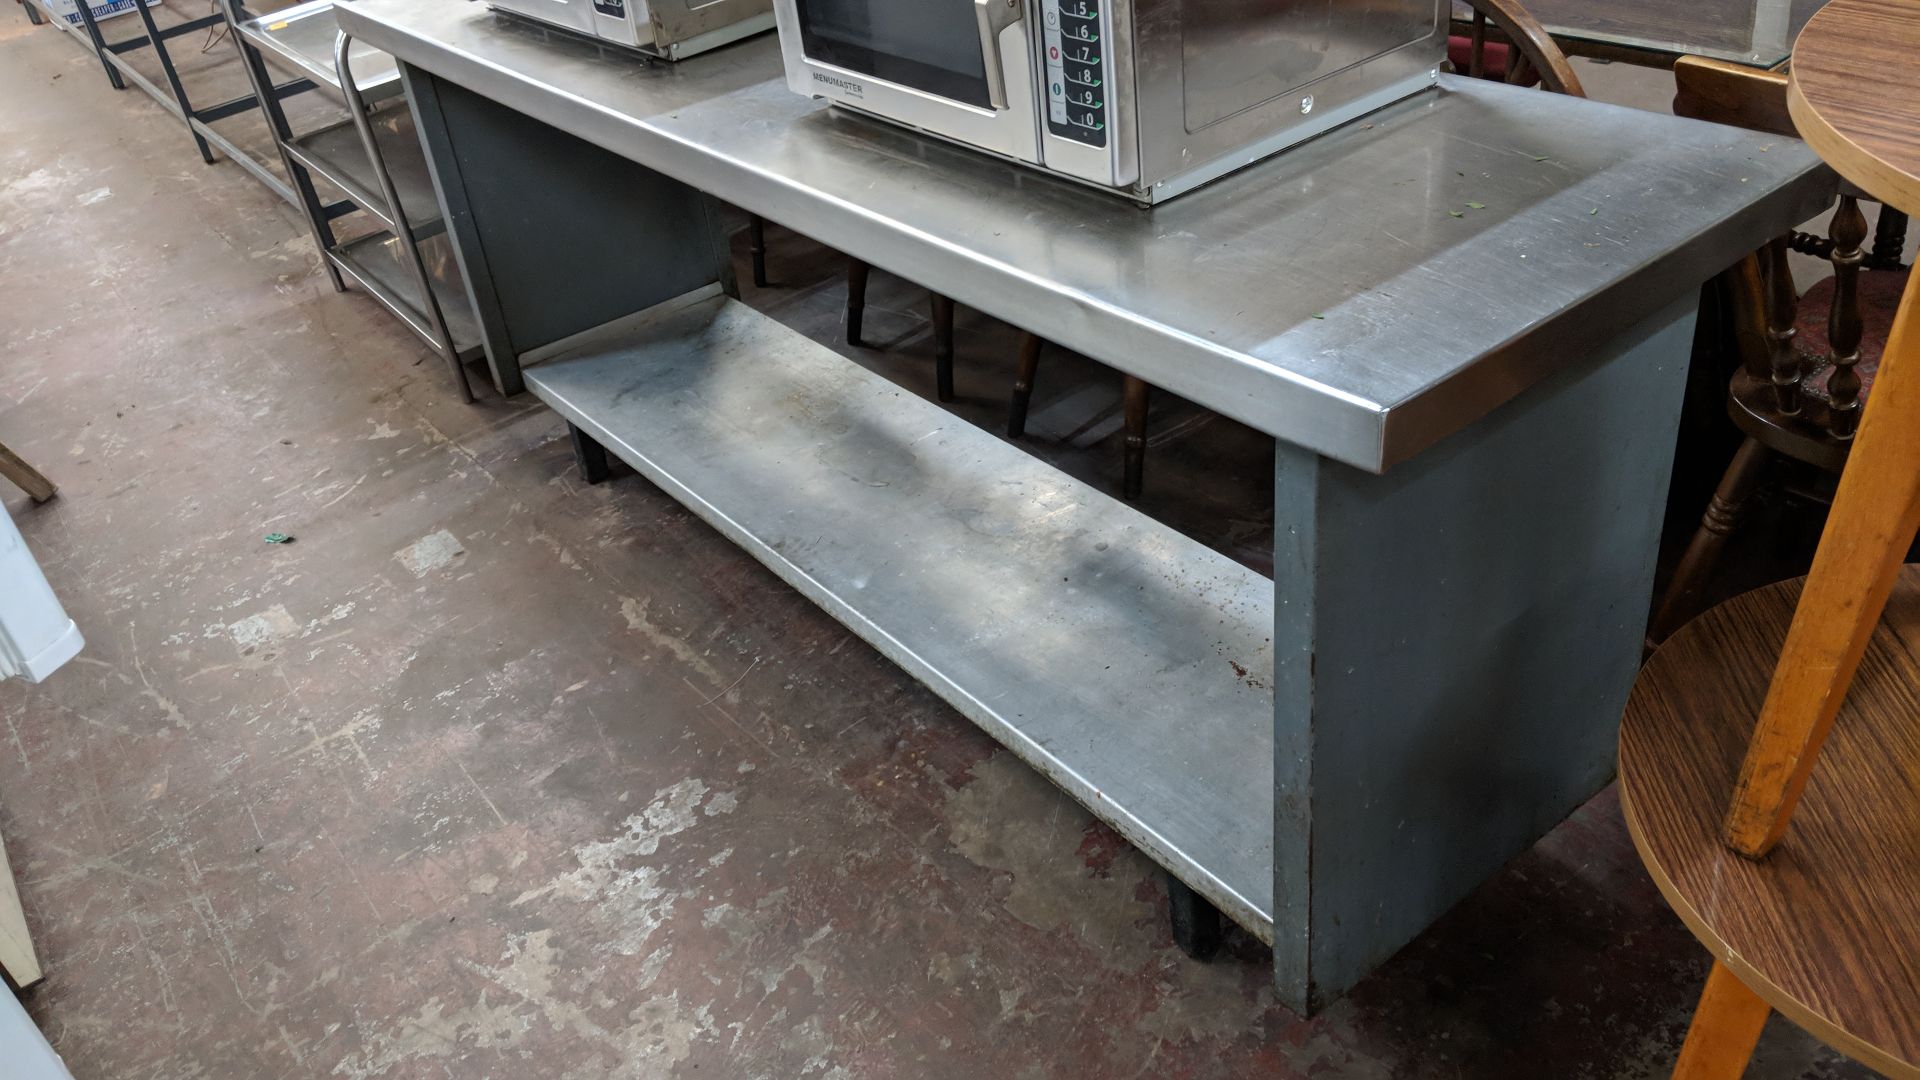 Long stainless steel twin-tier table with commercial can opener attached to same, table being